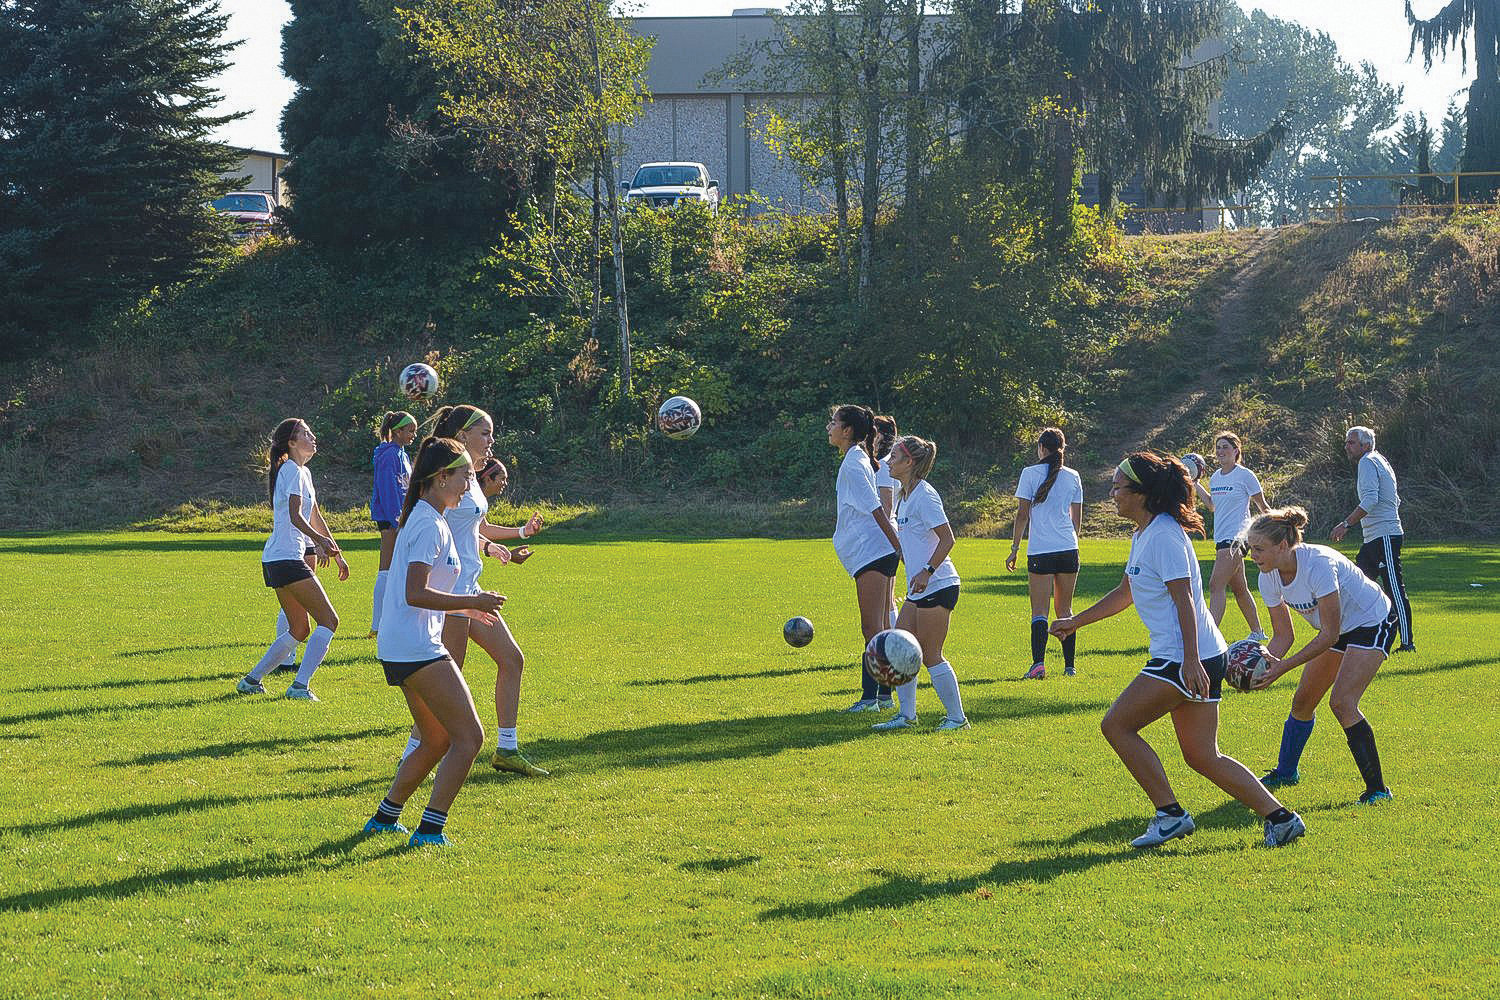 Players from the Ridgefield Spudders girls soccer team toss the ball to each other on Oct. 5. The team made it to the second round of state playoffs this year.